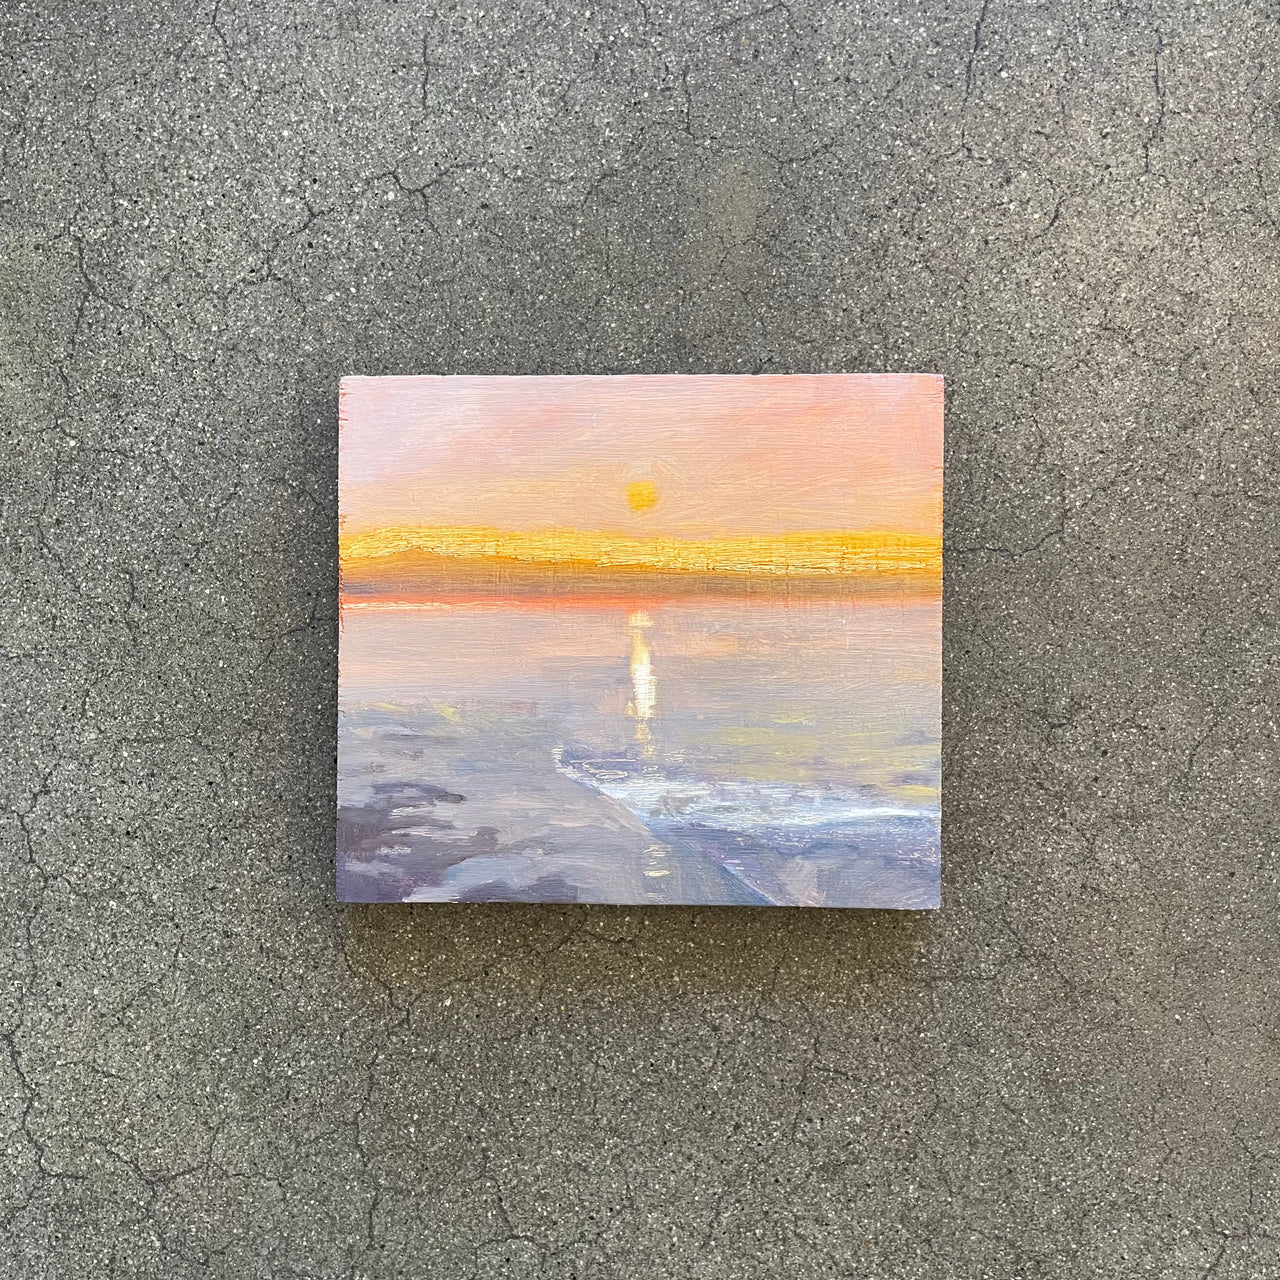 Sunset Reflection Painting on Lacewood